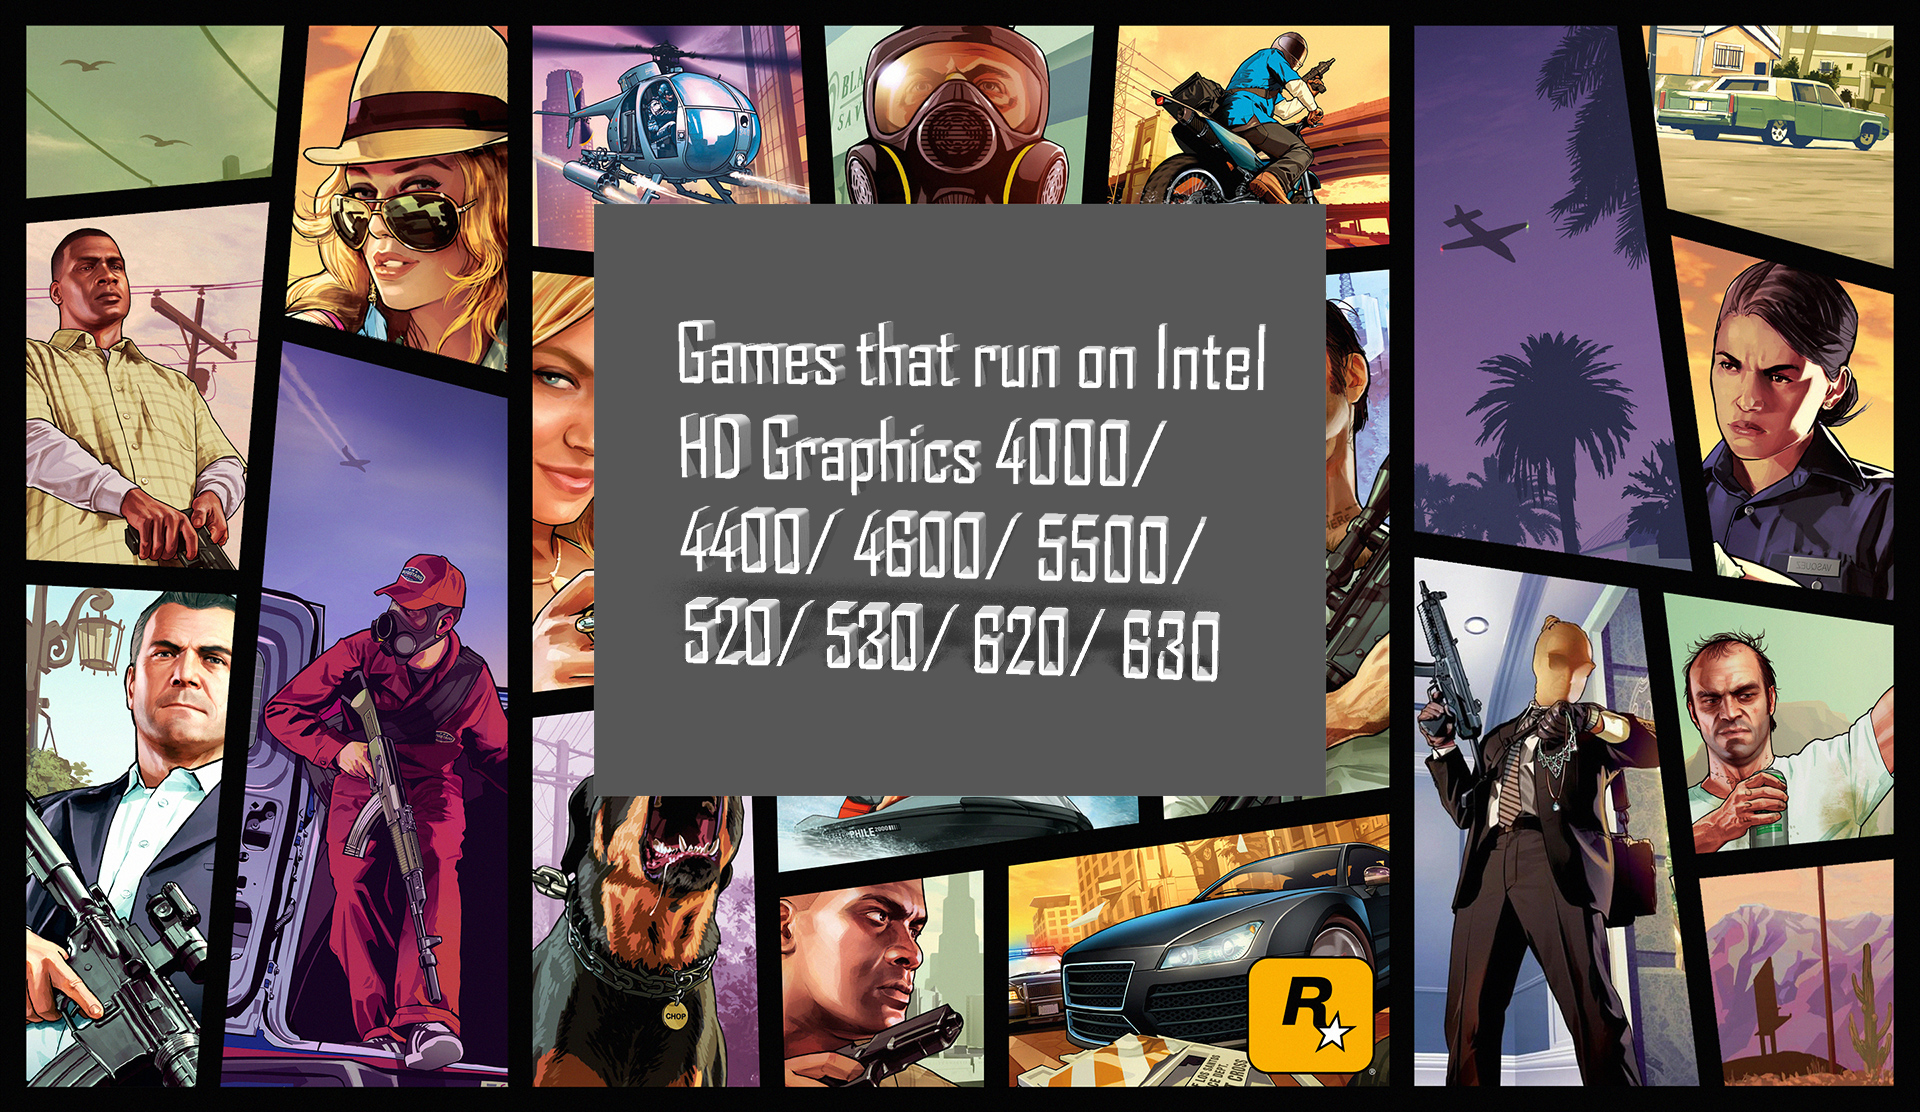 Guide]Games that run on Intel HD Graphics 4000/ 4400/ 4600/ 5500/ 520/ 530/  620/ 630 – Unleash Your Laptop